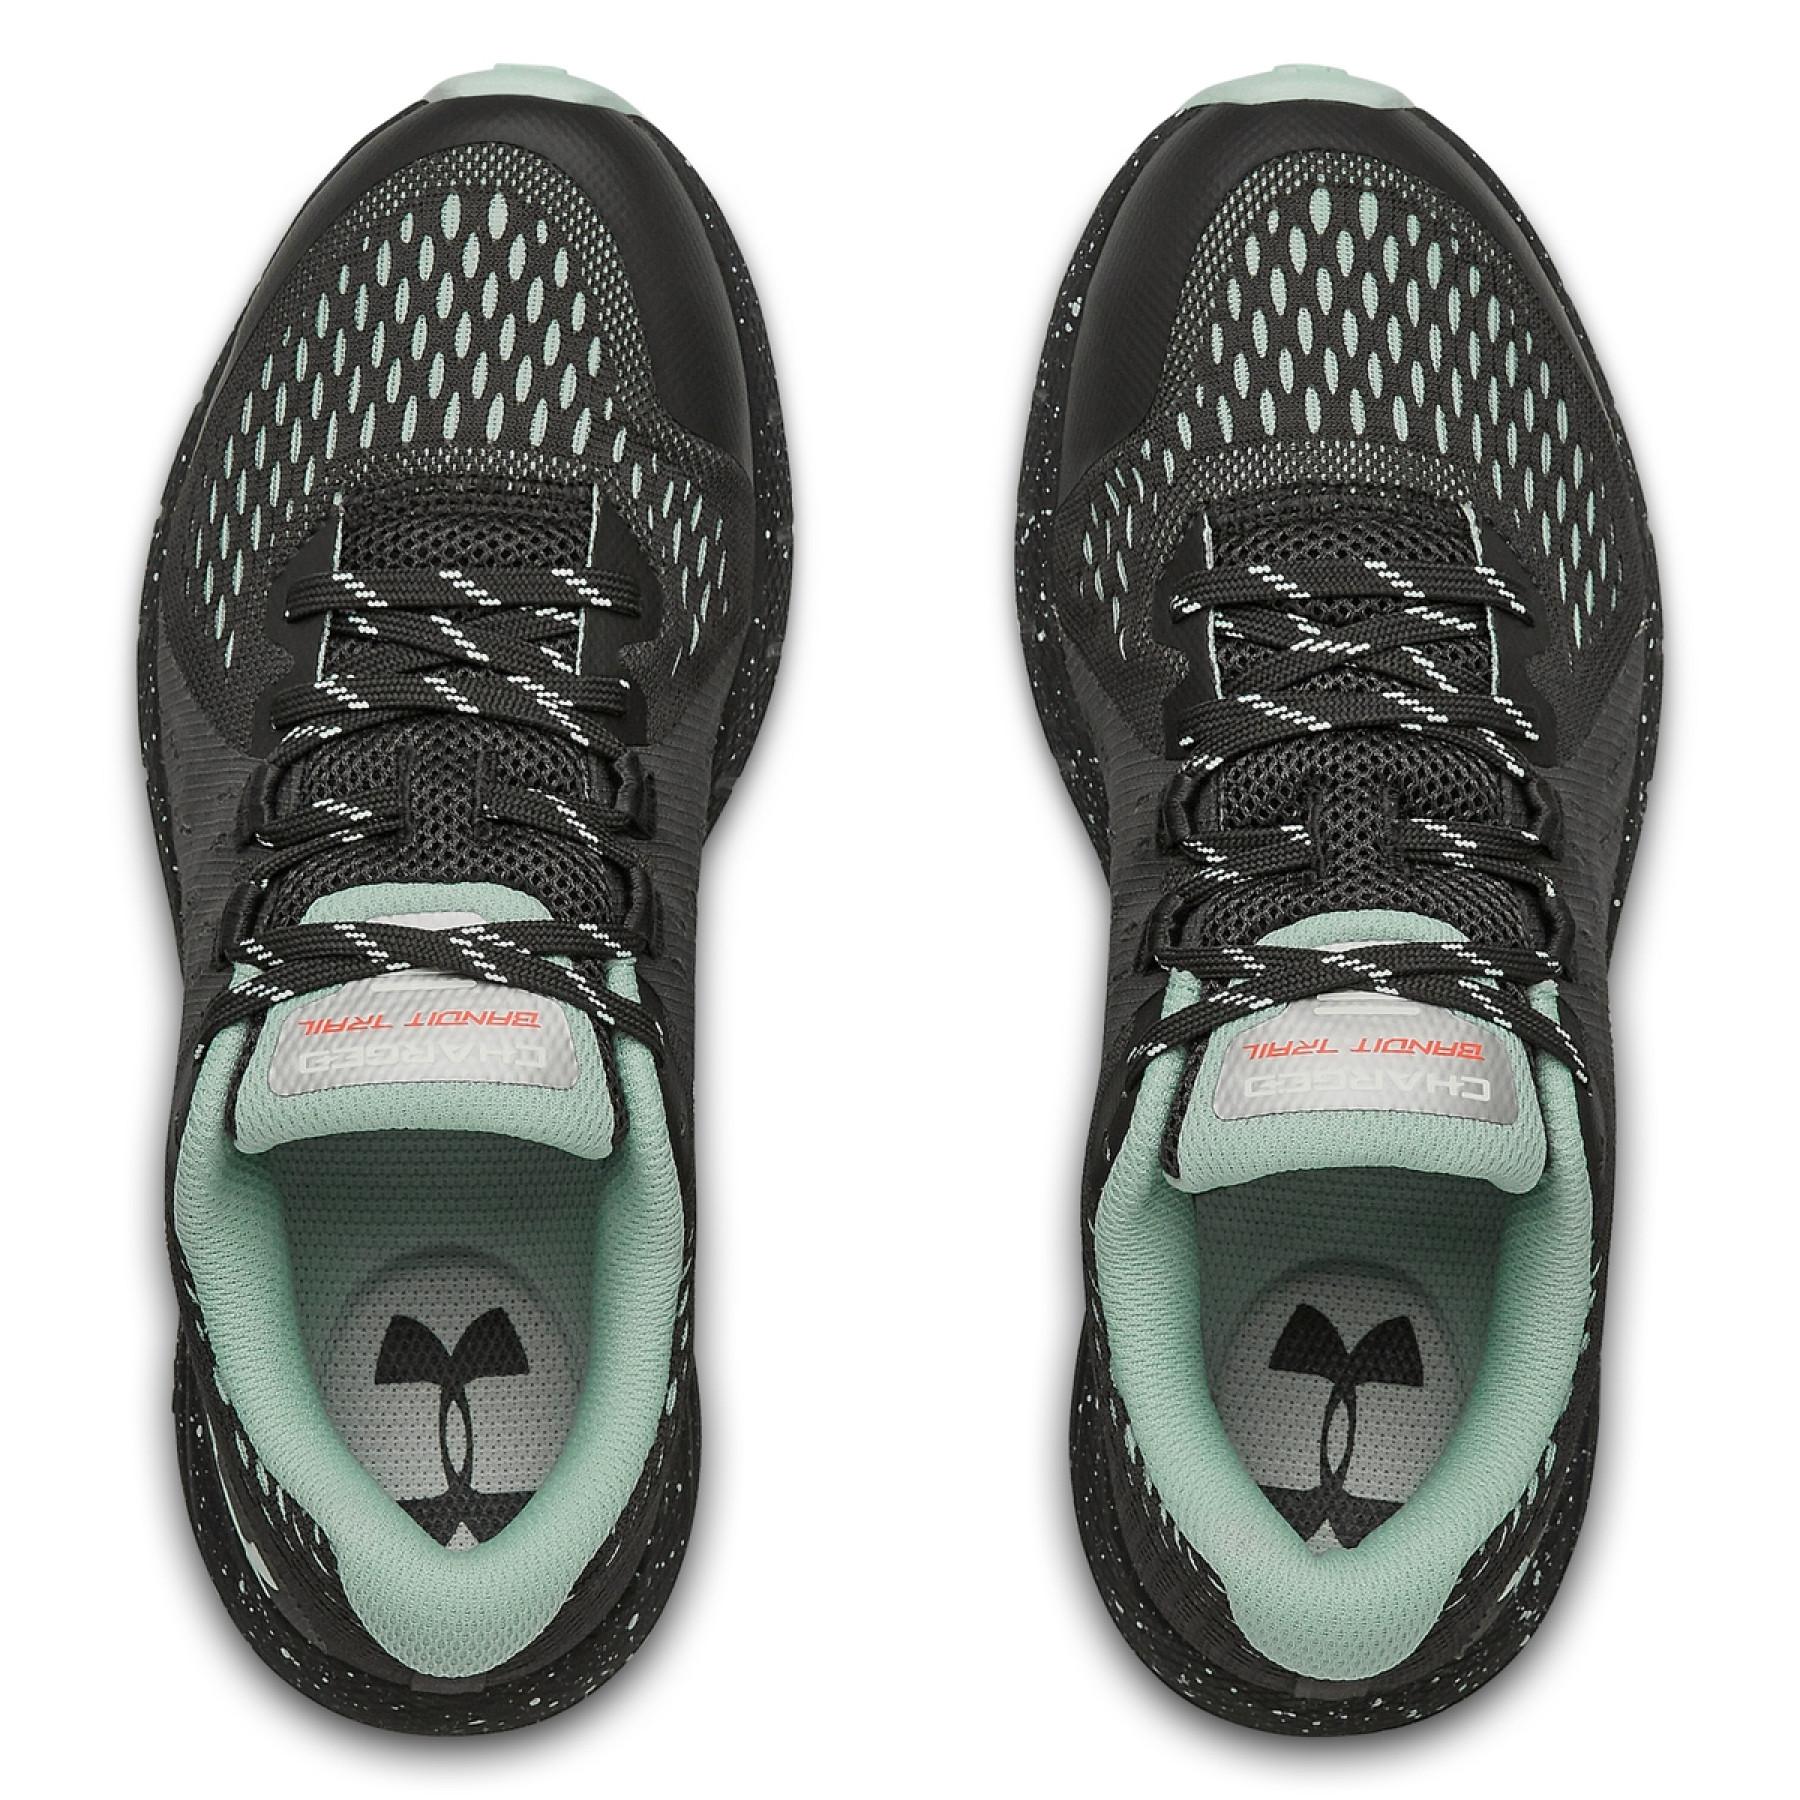 Zapatillas de running para mujer Under Armour Charged Bandit Trail